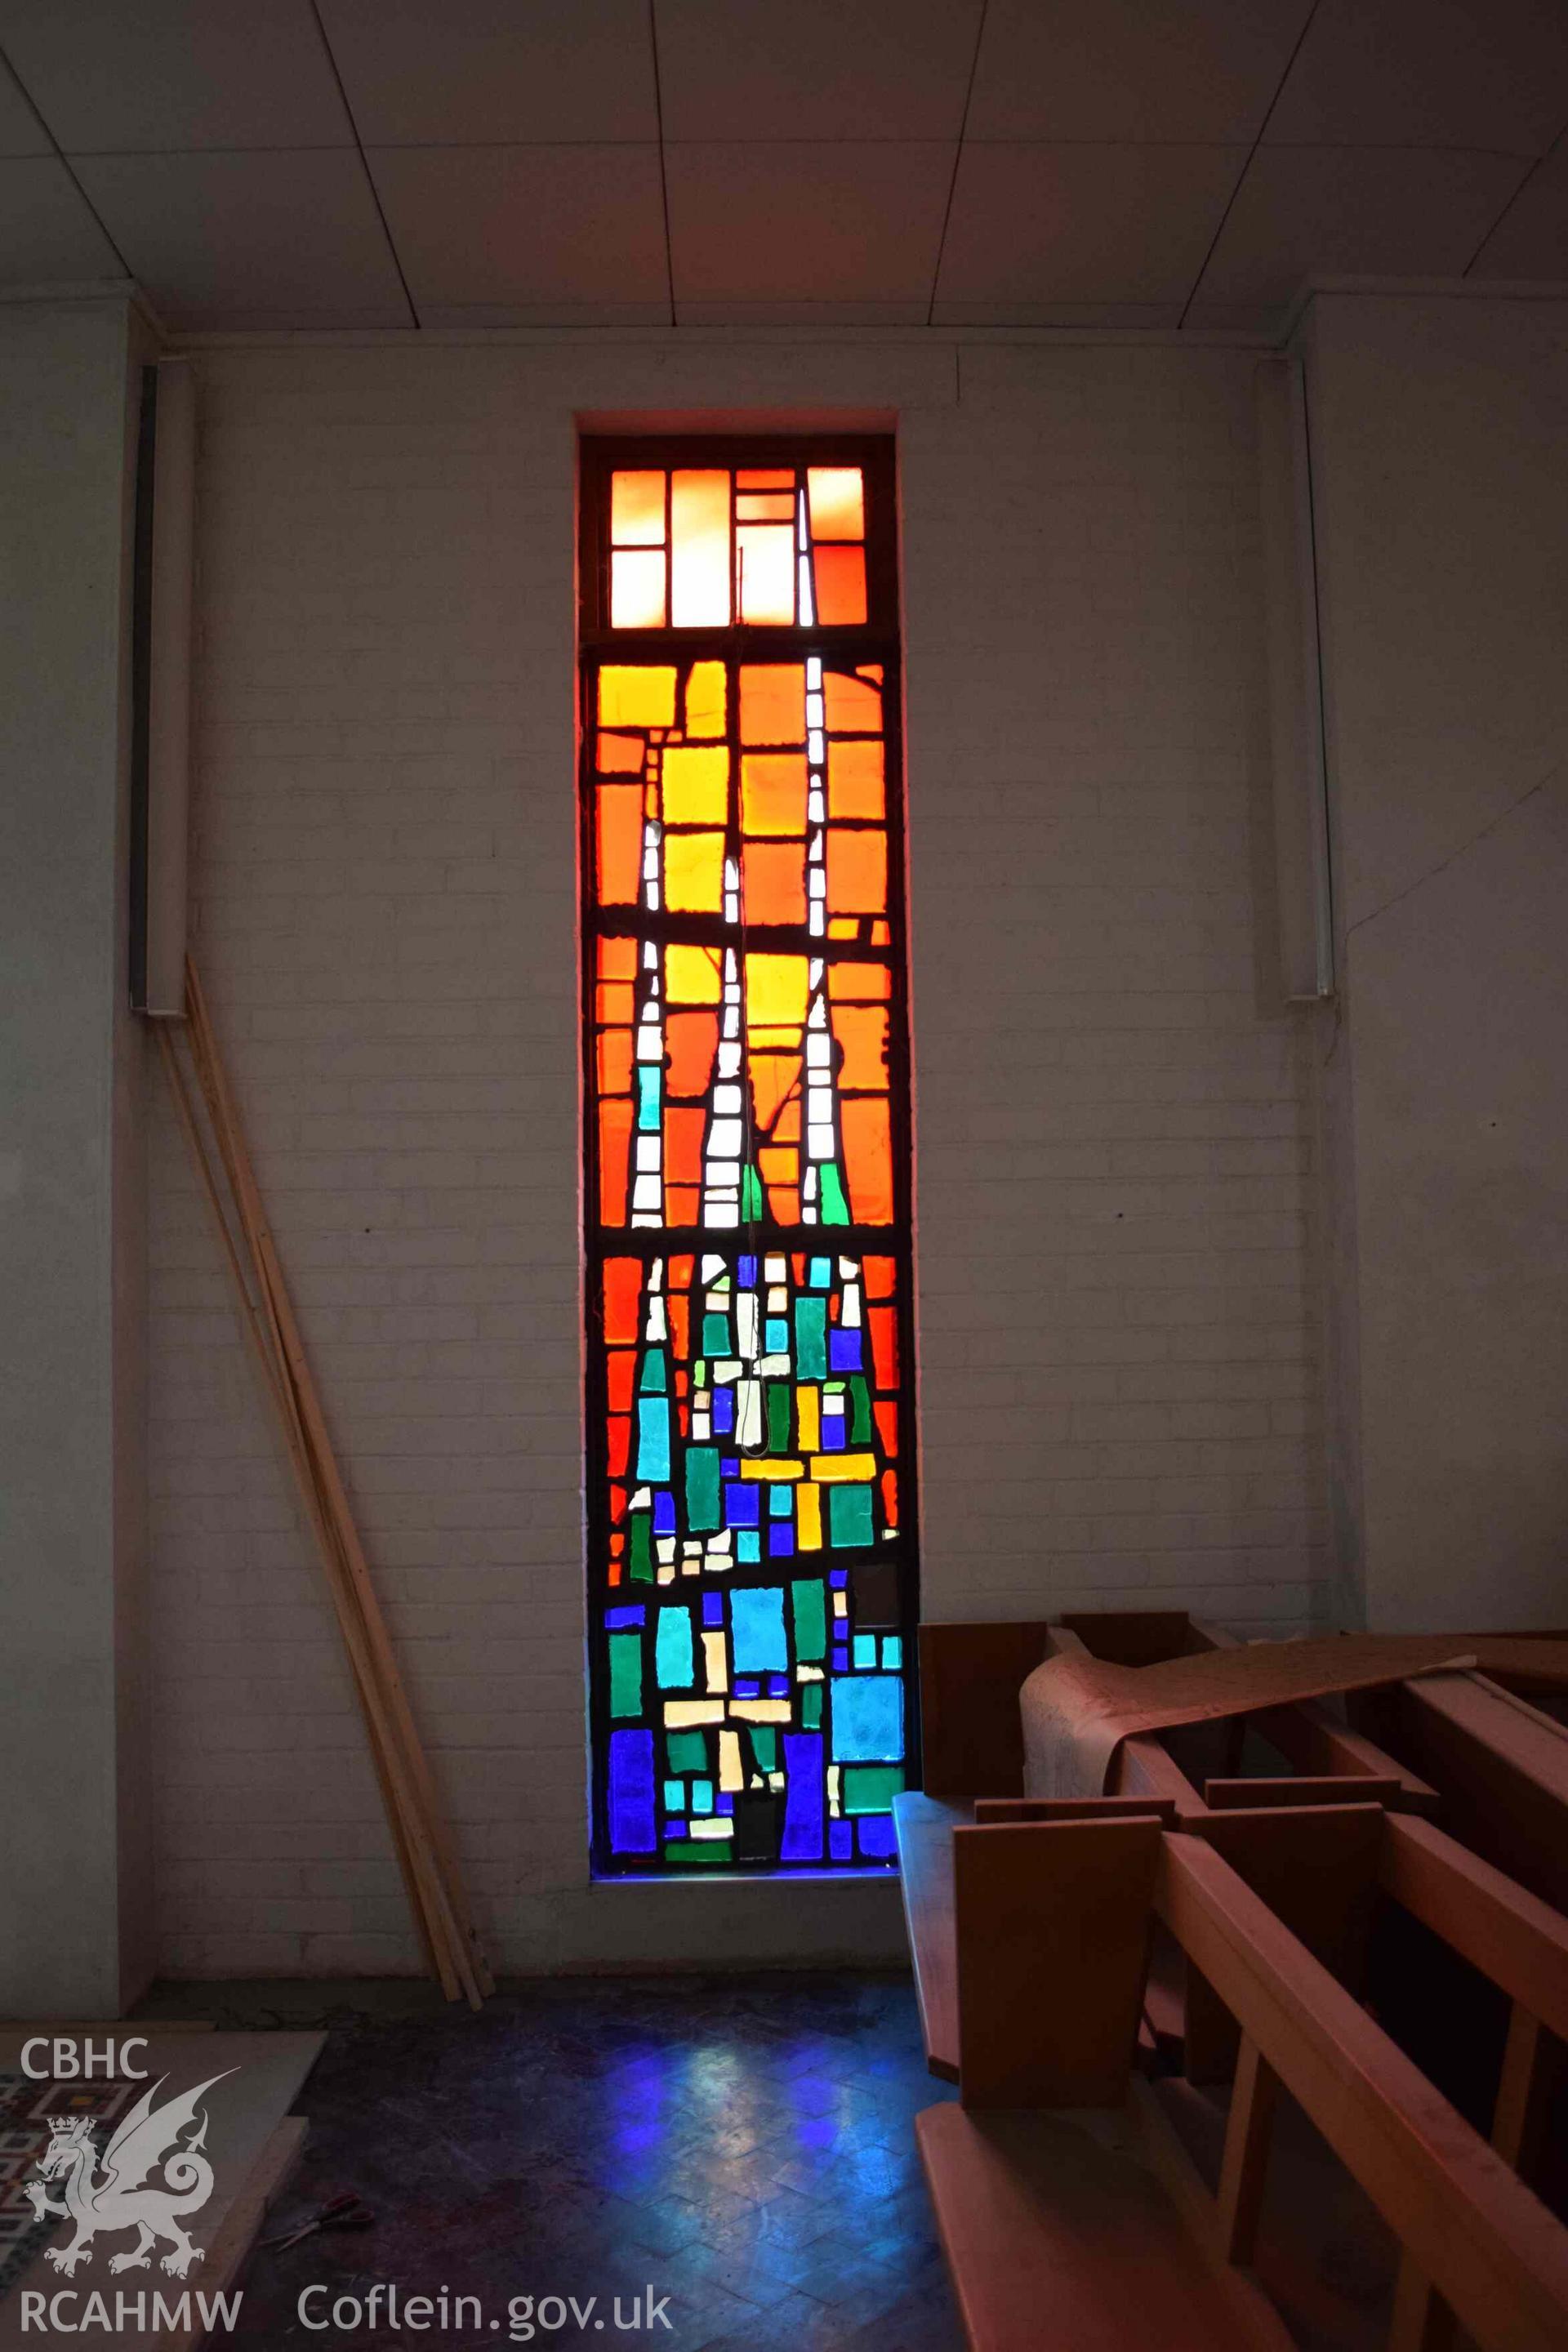 Photograph showing a Jonah Jones Dalle de Verre window (4a), at the church of The Resurrection of Our Saviour, Morfa Nefyn, taken on behalf of the Architectural Glass Centre during the removal of the windows in March 2019.